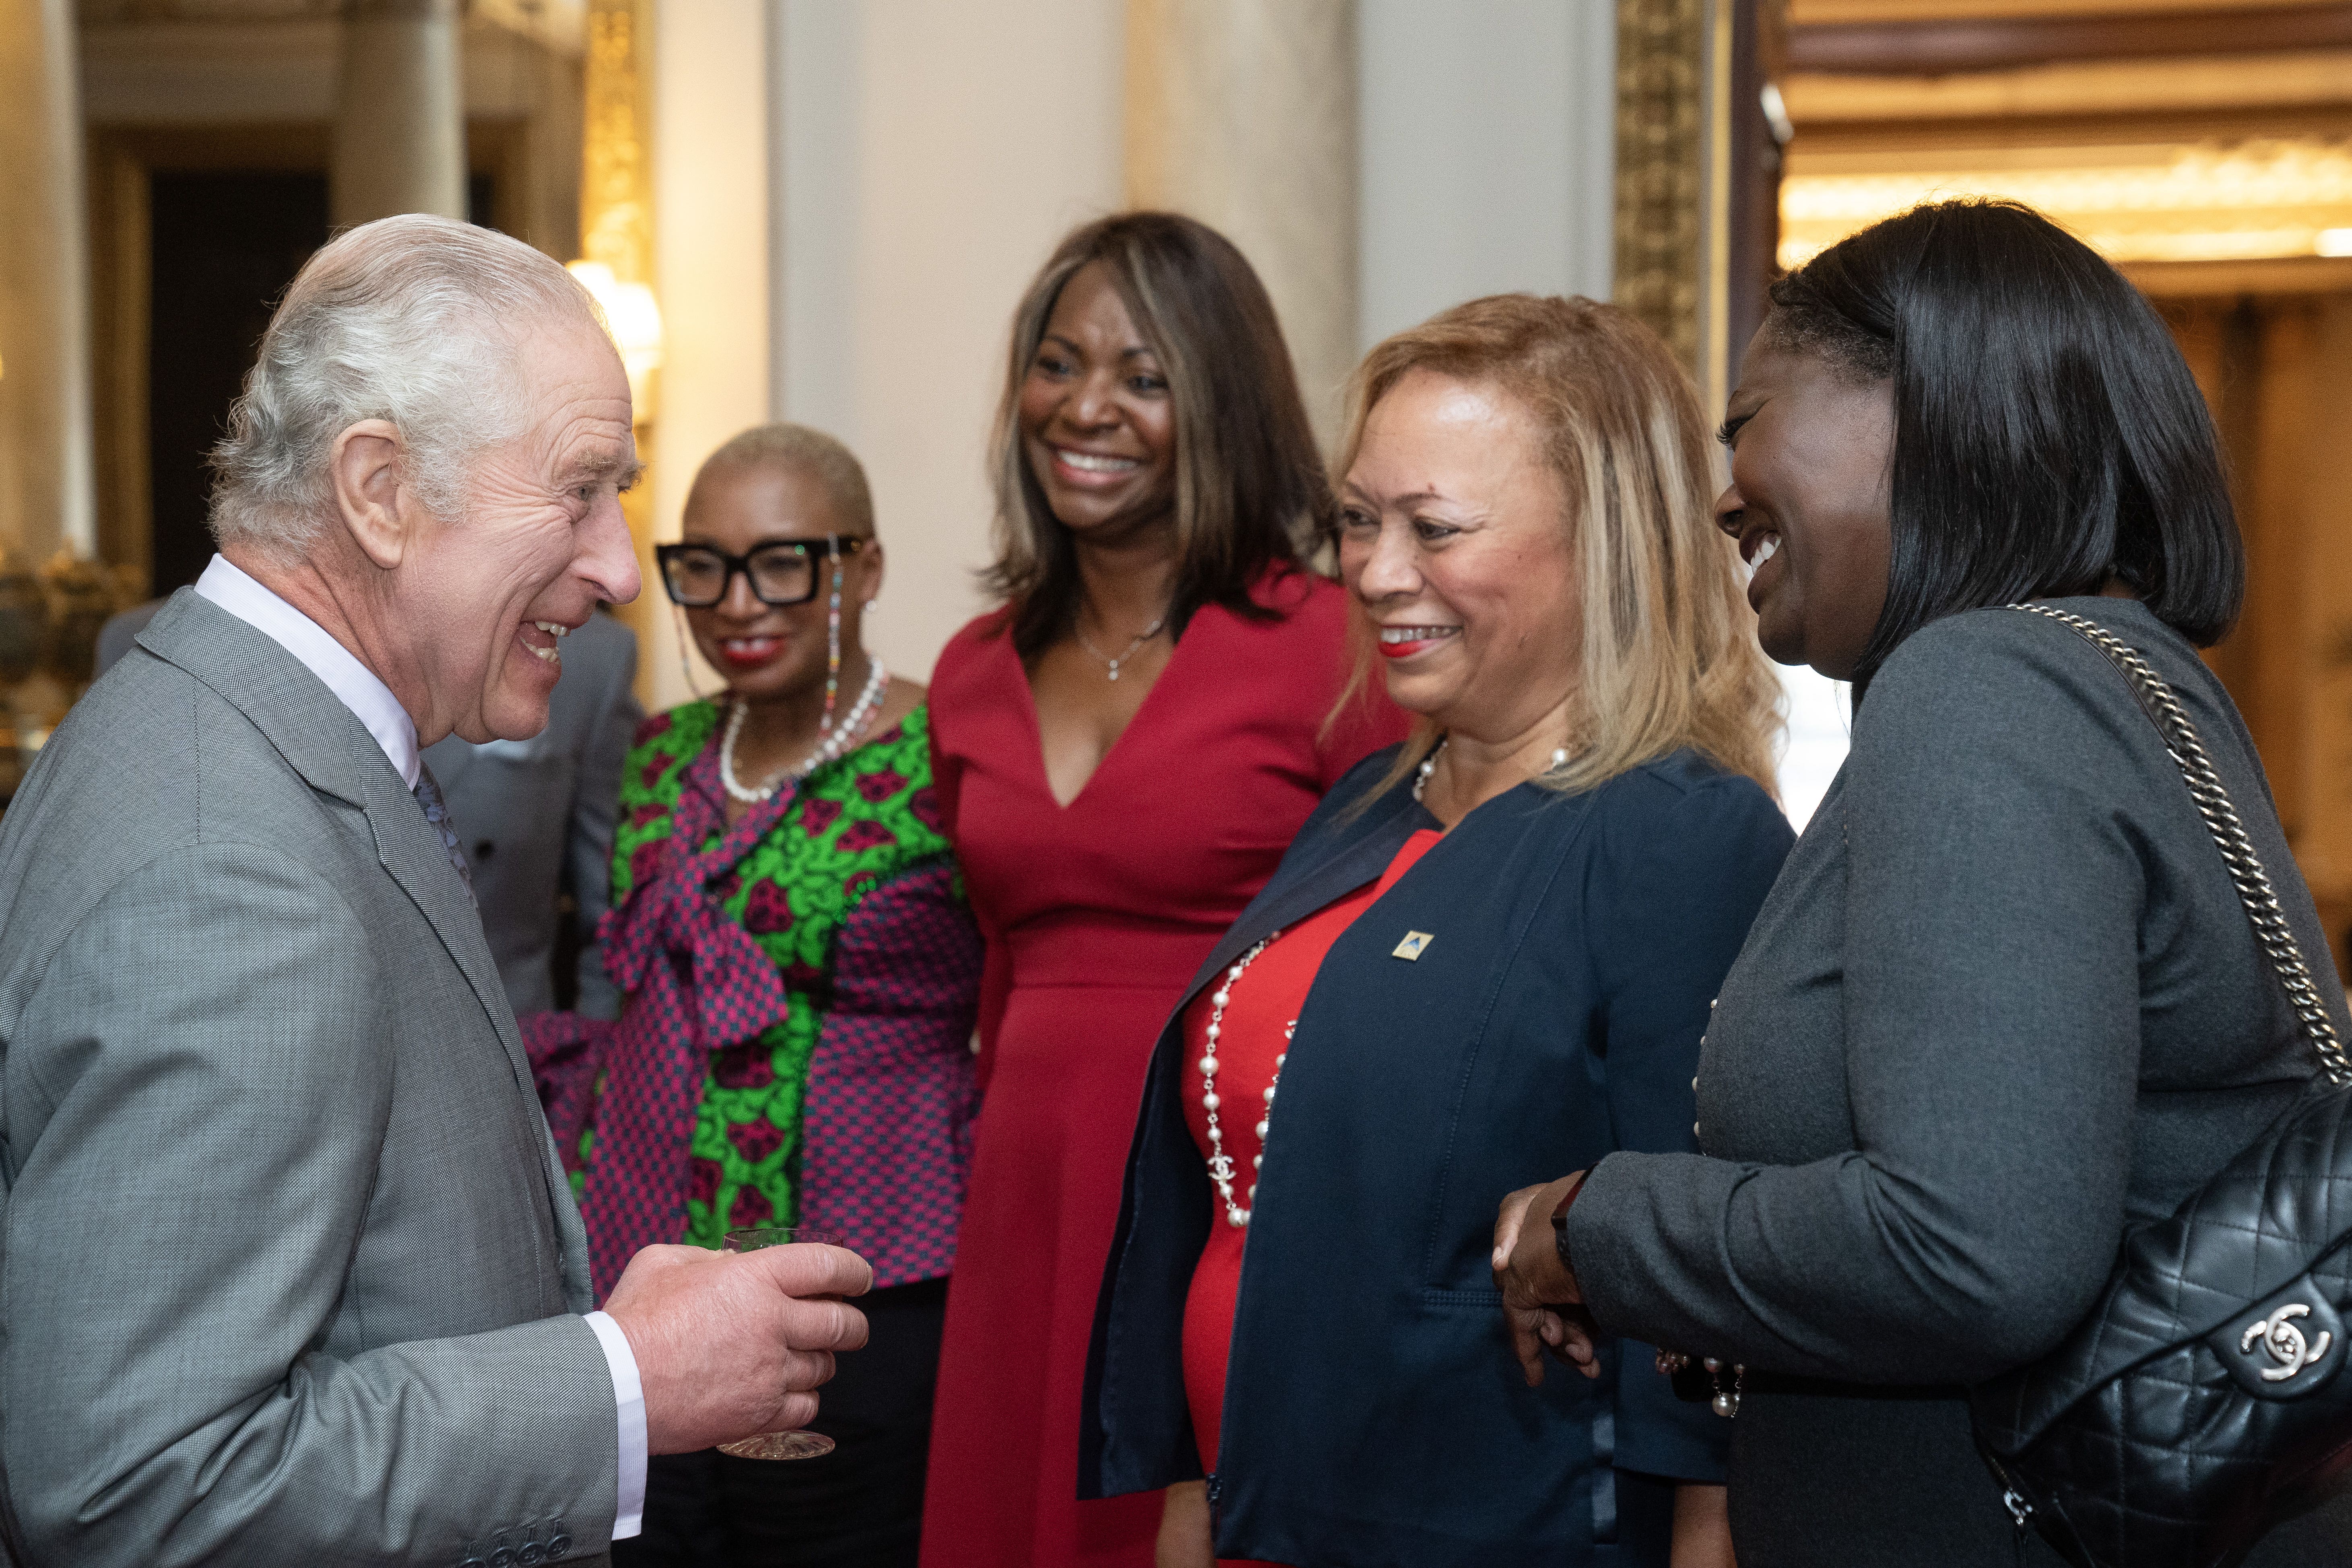 The King greets Black Powerlist guests at a Buckingham Palace reception